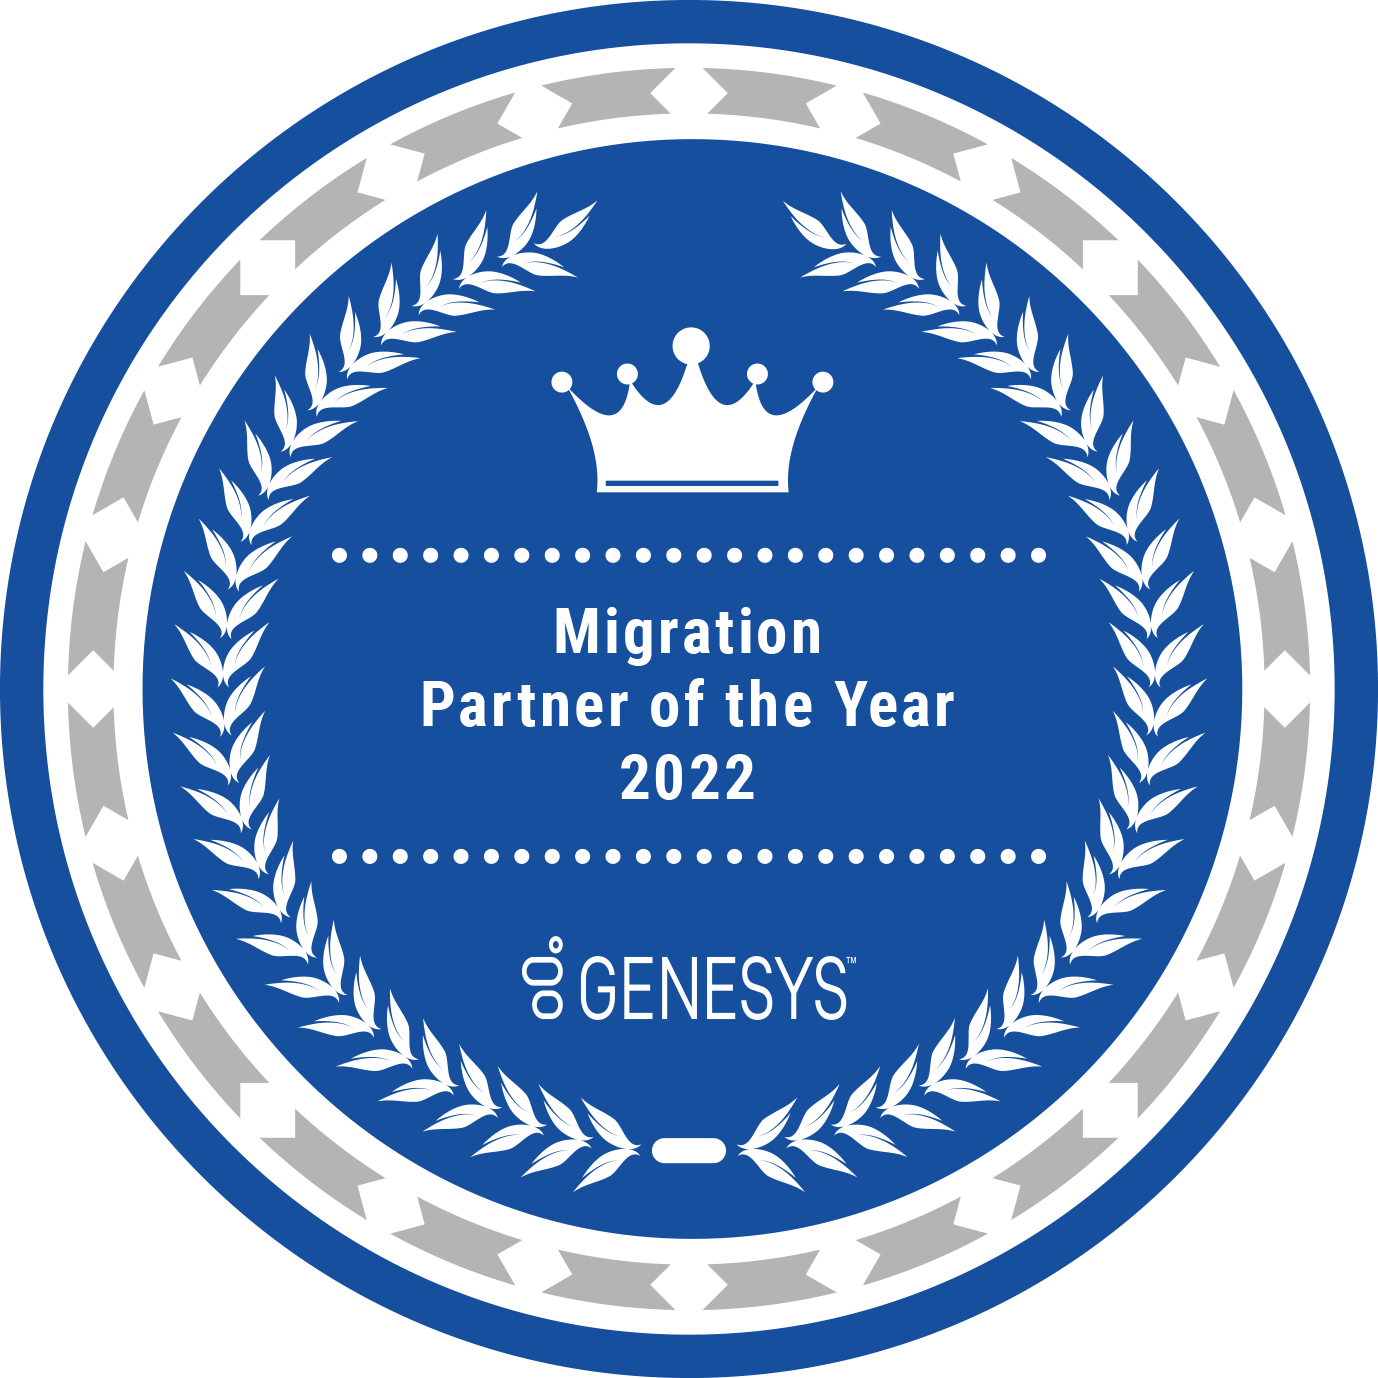 Migration Partner of the Year 2022